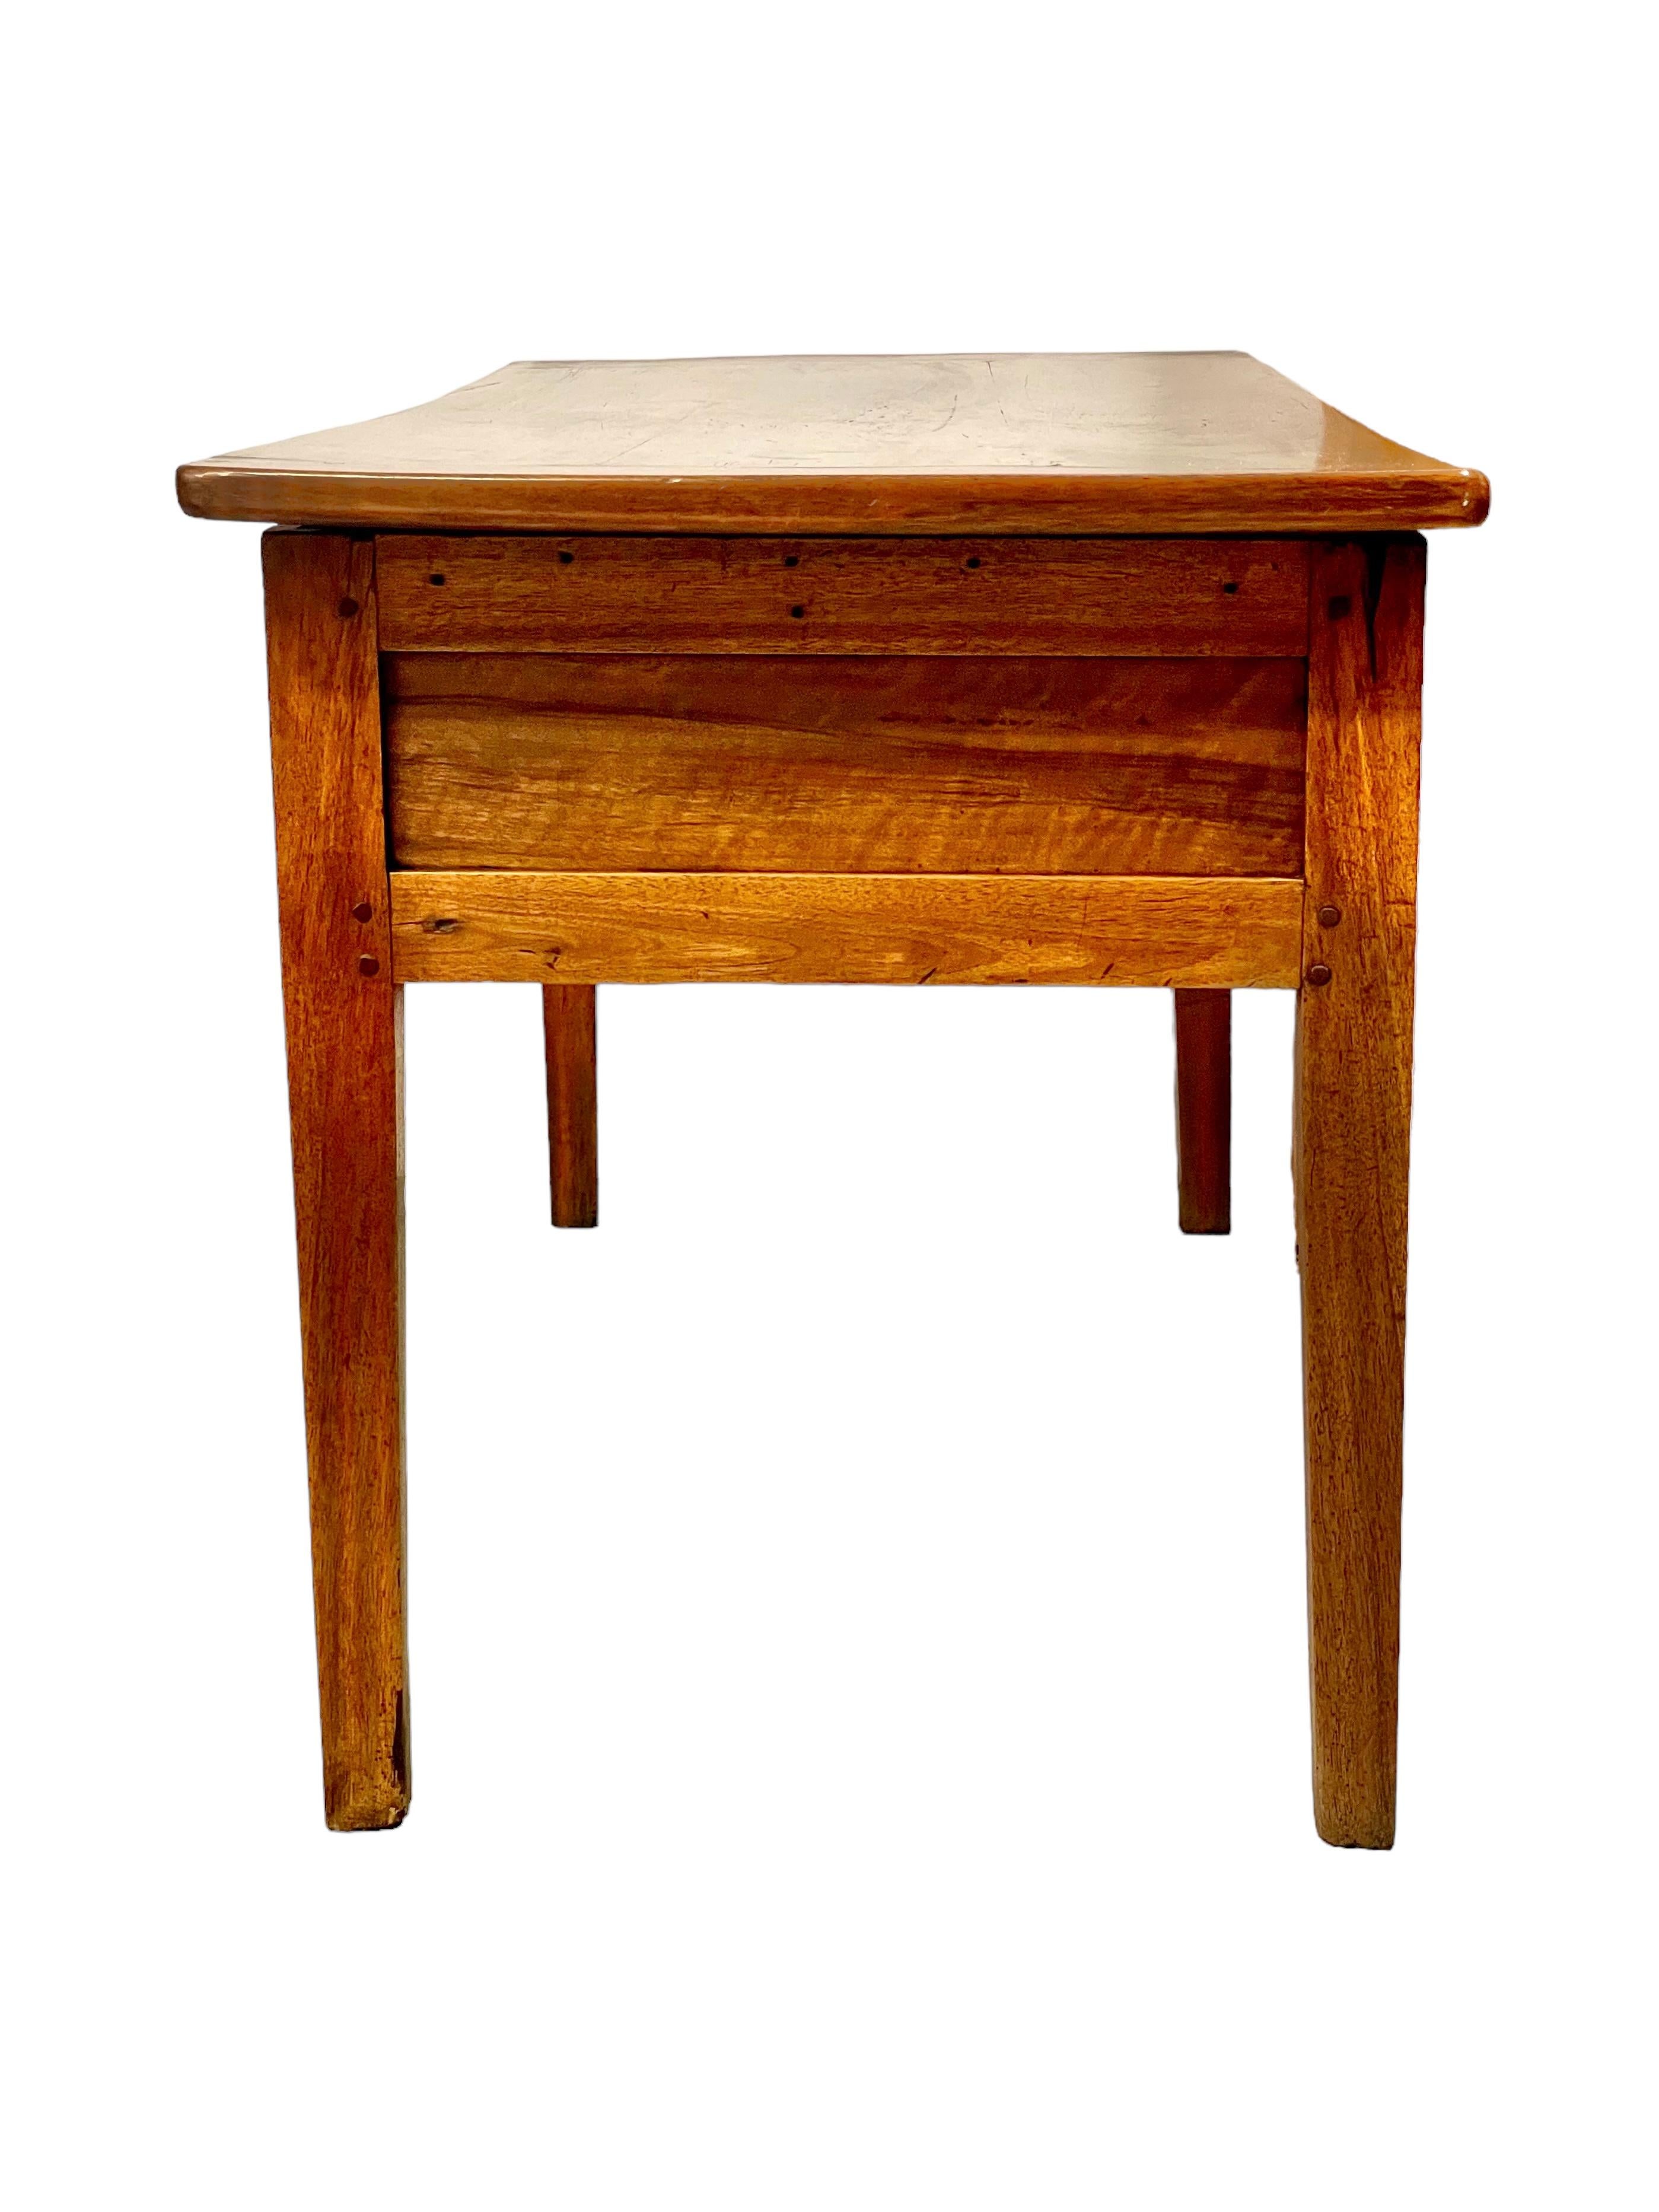 A rare French 19th century hand-crafted 'Pétrin' table with removable top, originally constructed for the purpose of kneading, proving and storing bread dough, and sometimes referred to as a 'dough bin' or 'trough'. Dough for bread and pastry was